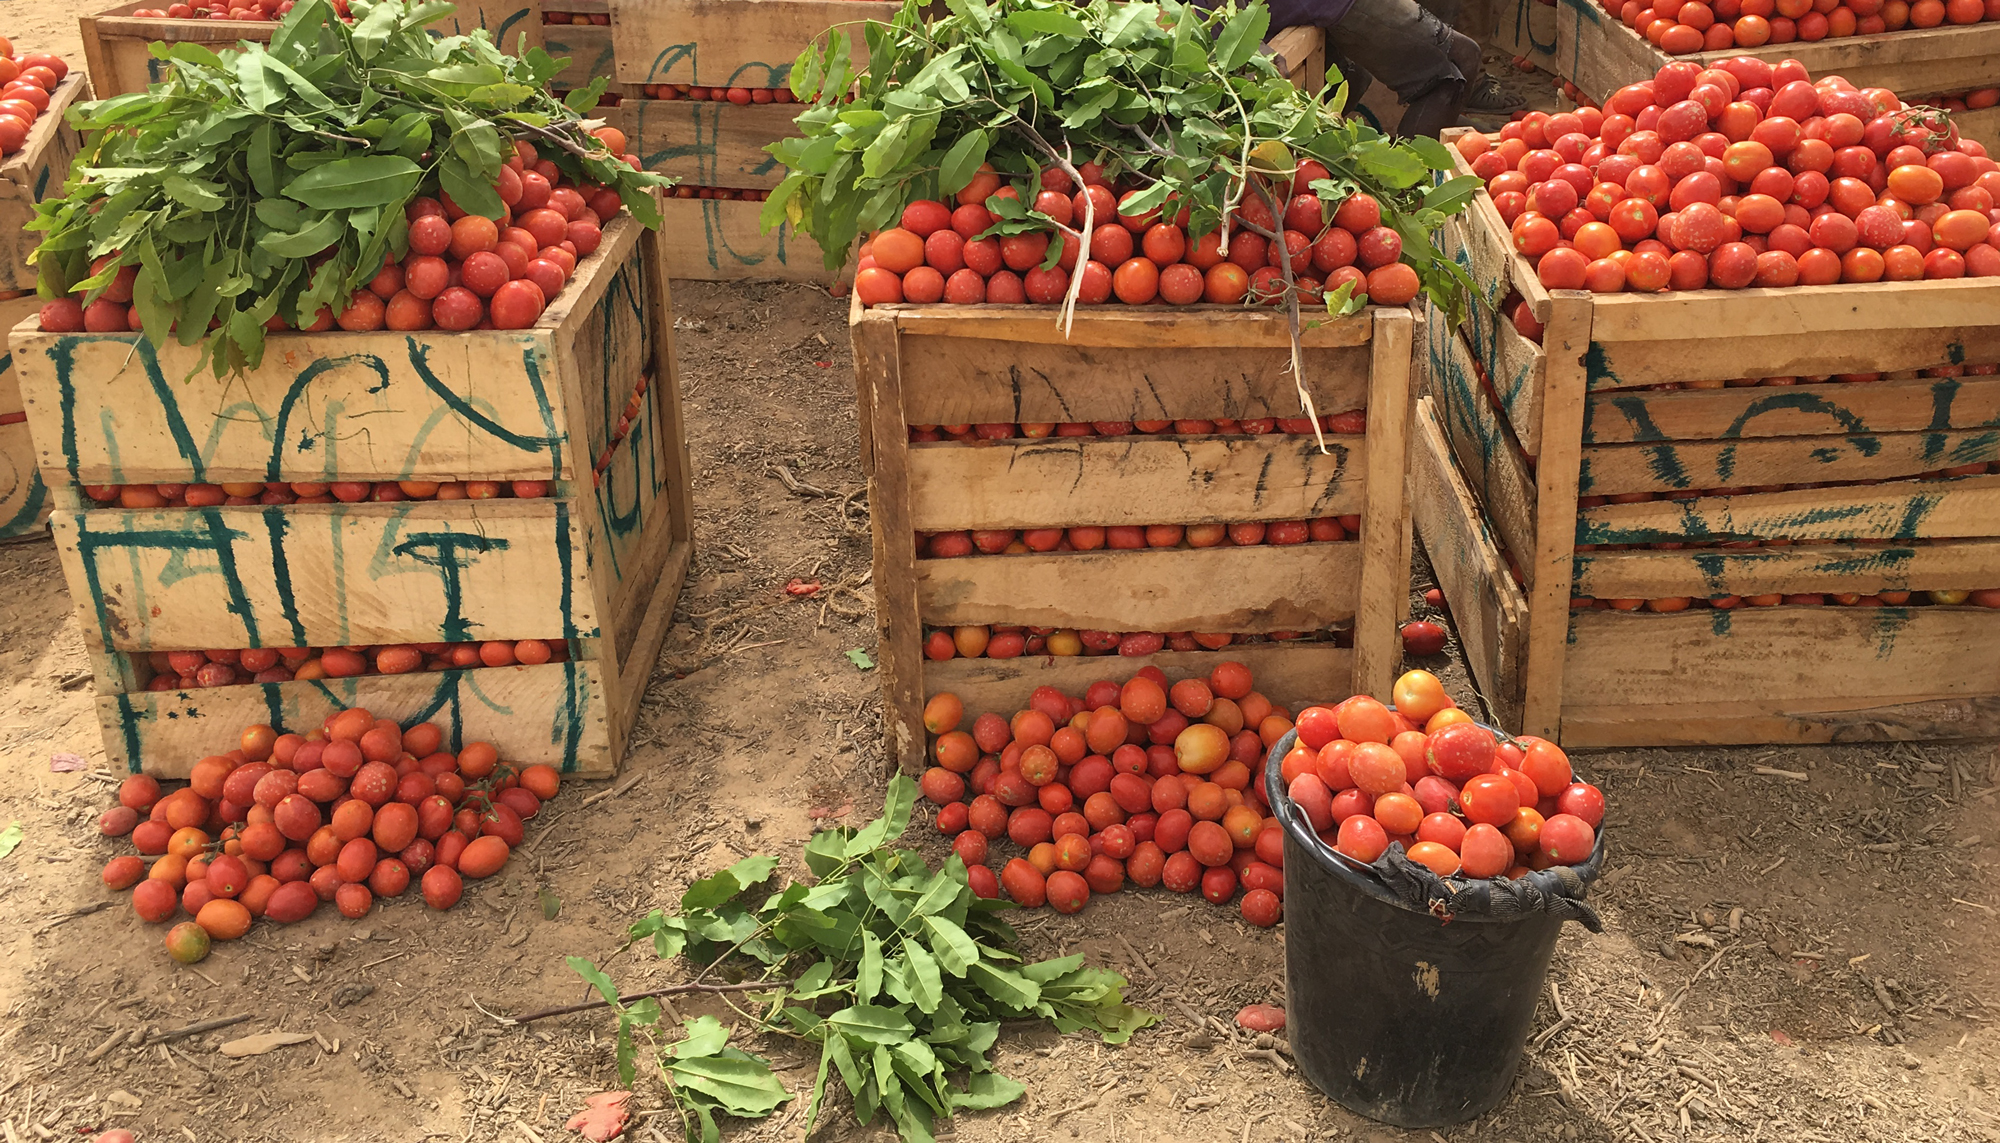 Large wooden crates piled high with tomatoes, with some leafy branches on top, next to a buck of tomatoes and more tomatoes on the ground